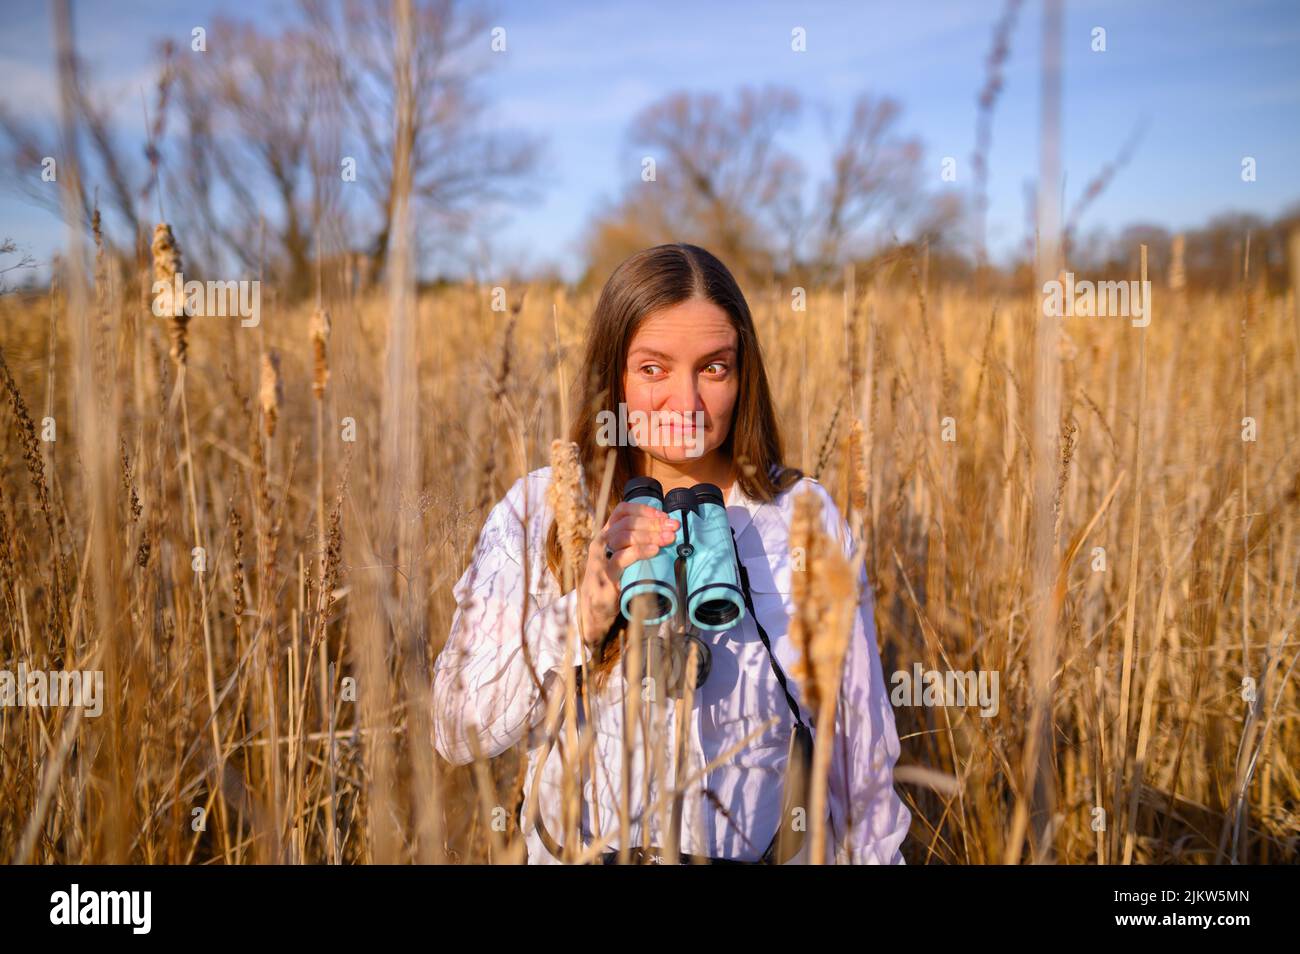 Woman looking at the to the side, with a confused expression, with blue binoculars standing in a field of cat tails in a marsh during the day. Stock Photo